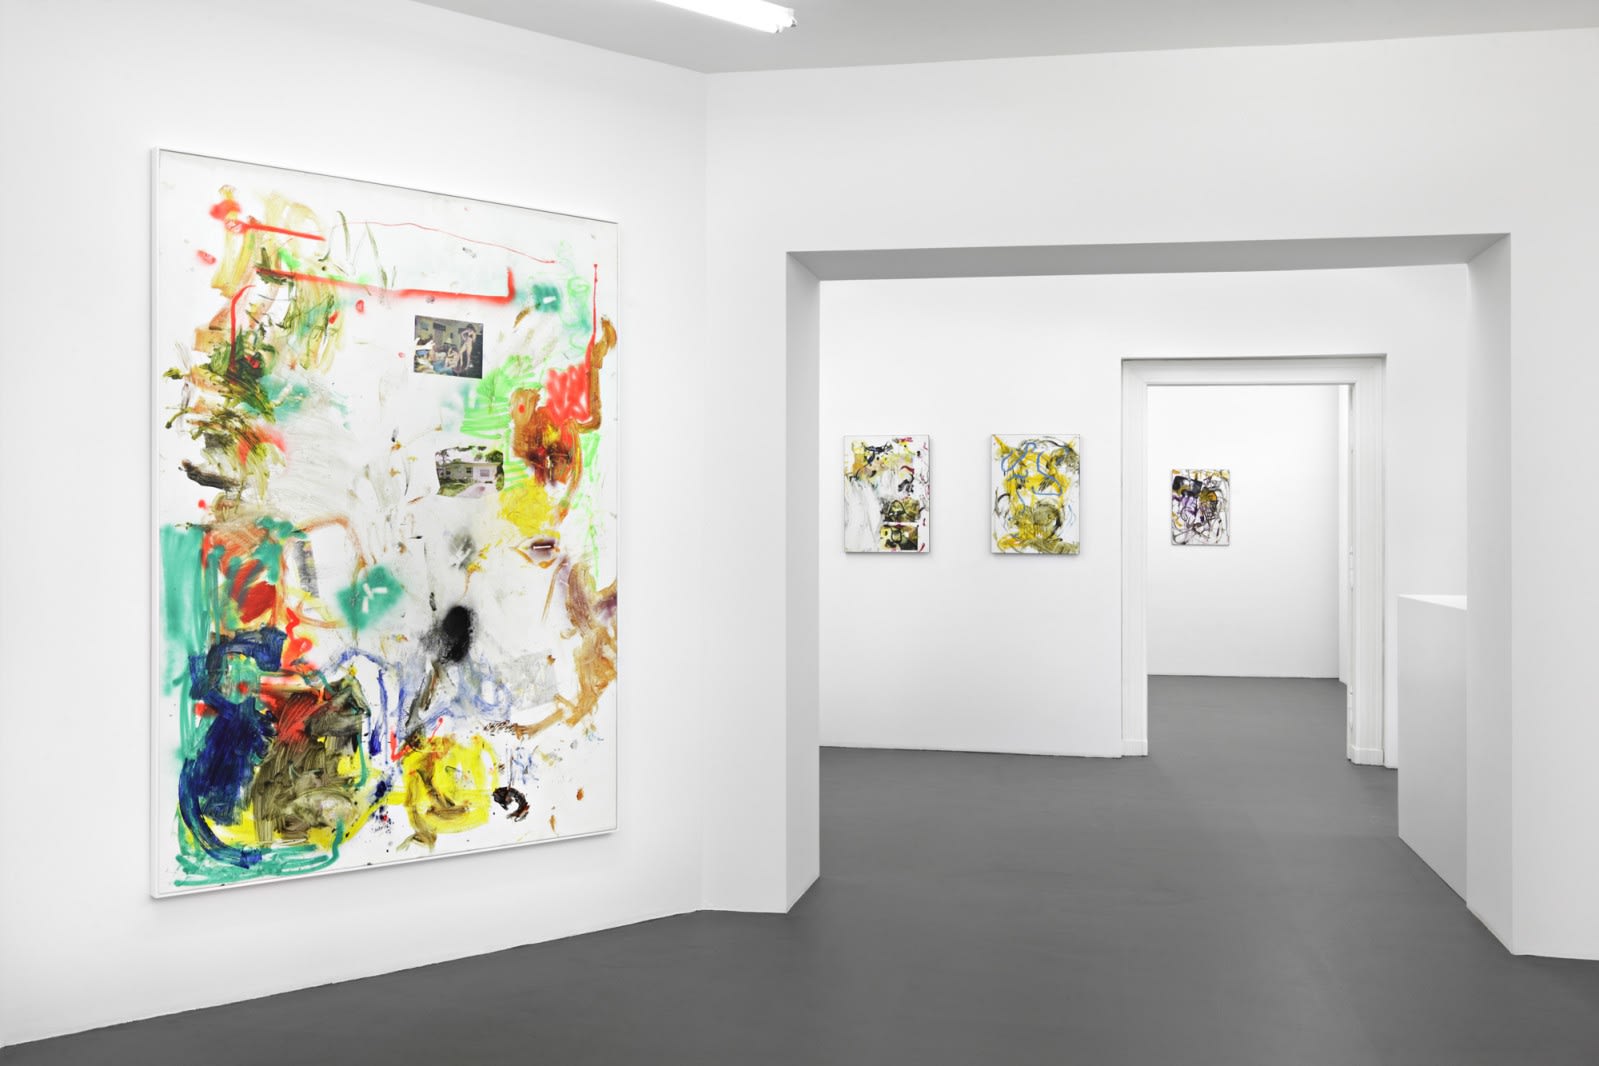 Leo Gabin Whatever is Clever Installation View April 27 – June 23, 2012 Peres Projects, Berlin